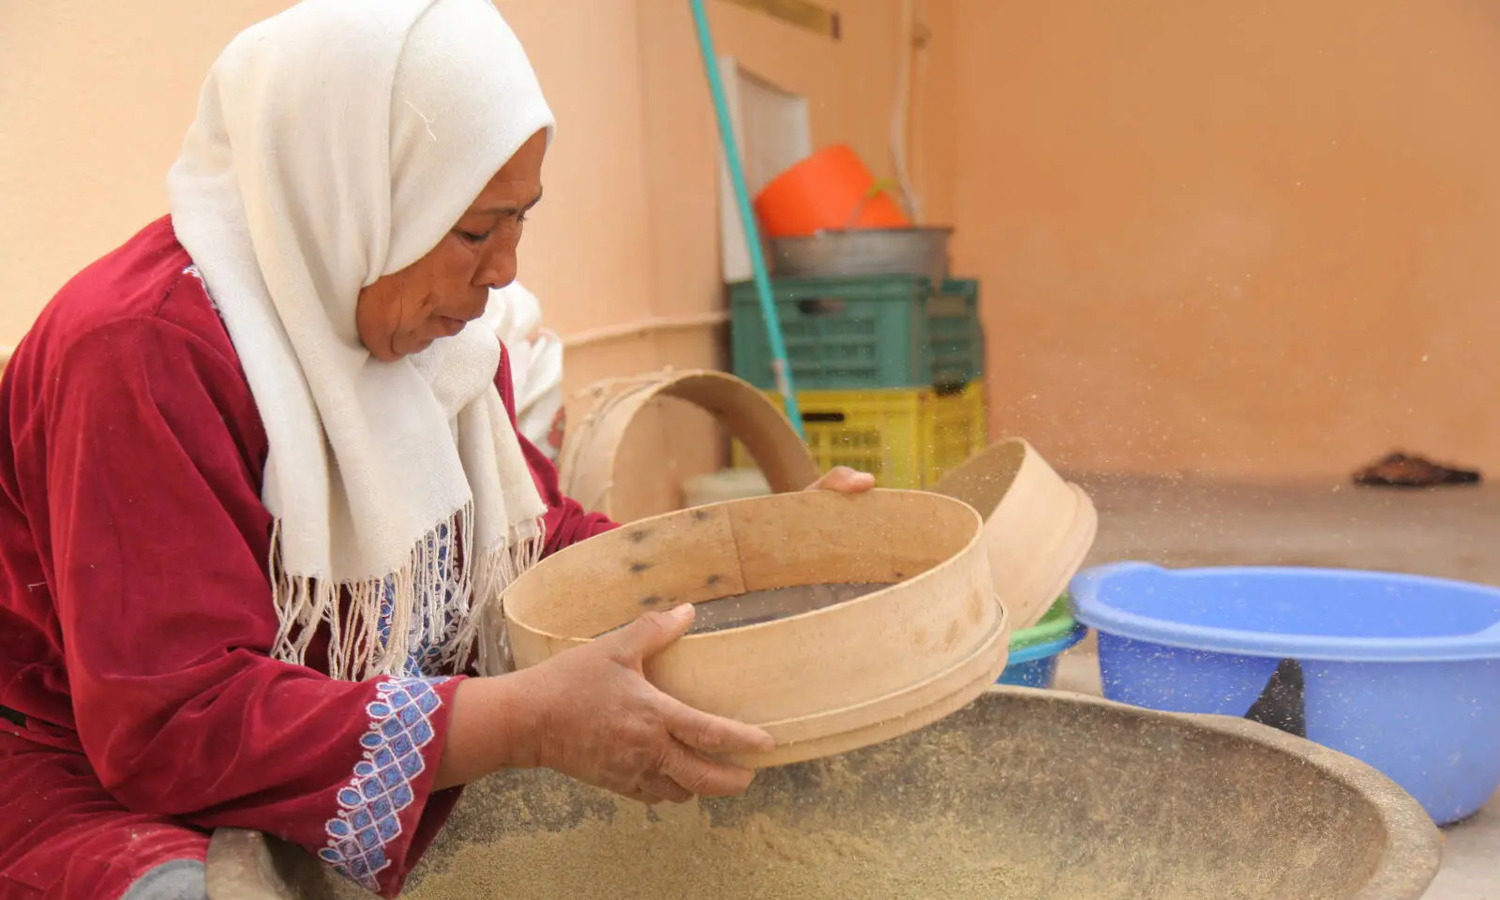 Research in Tunisia shows that women are more involved in livestock activities than policymakers assumed, and supporting them could mitigate climate change.